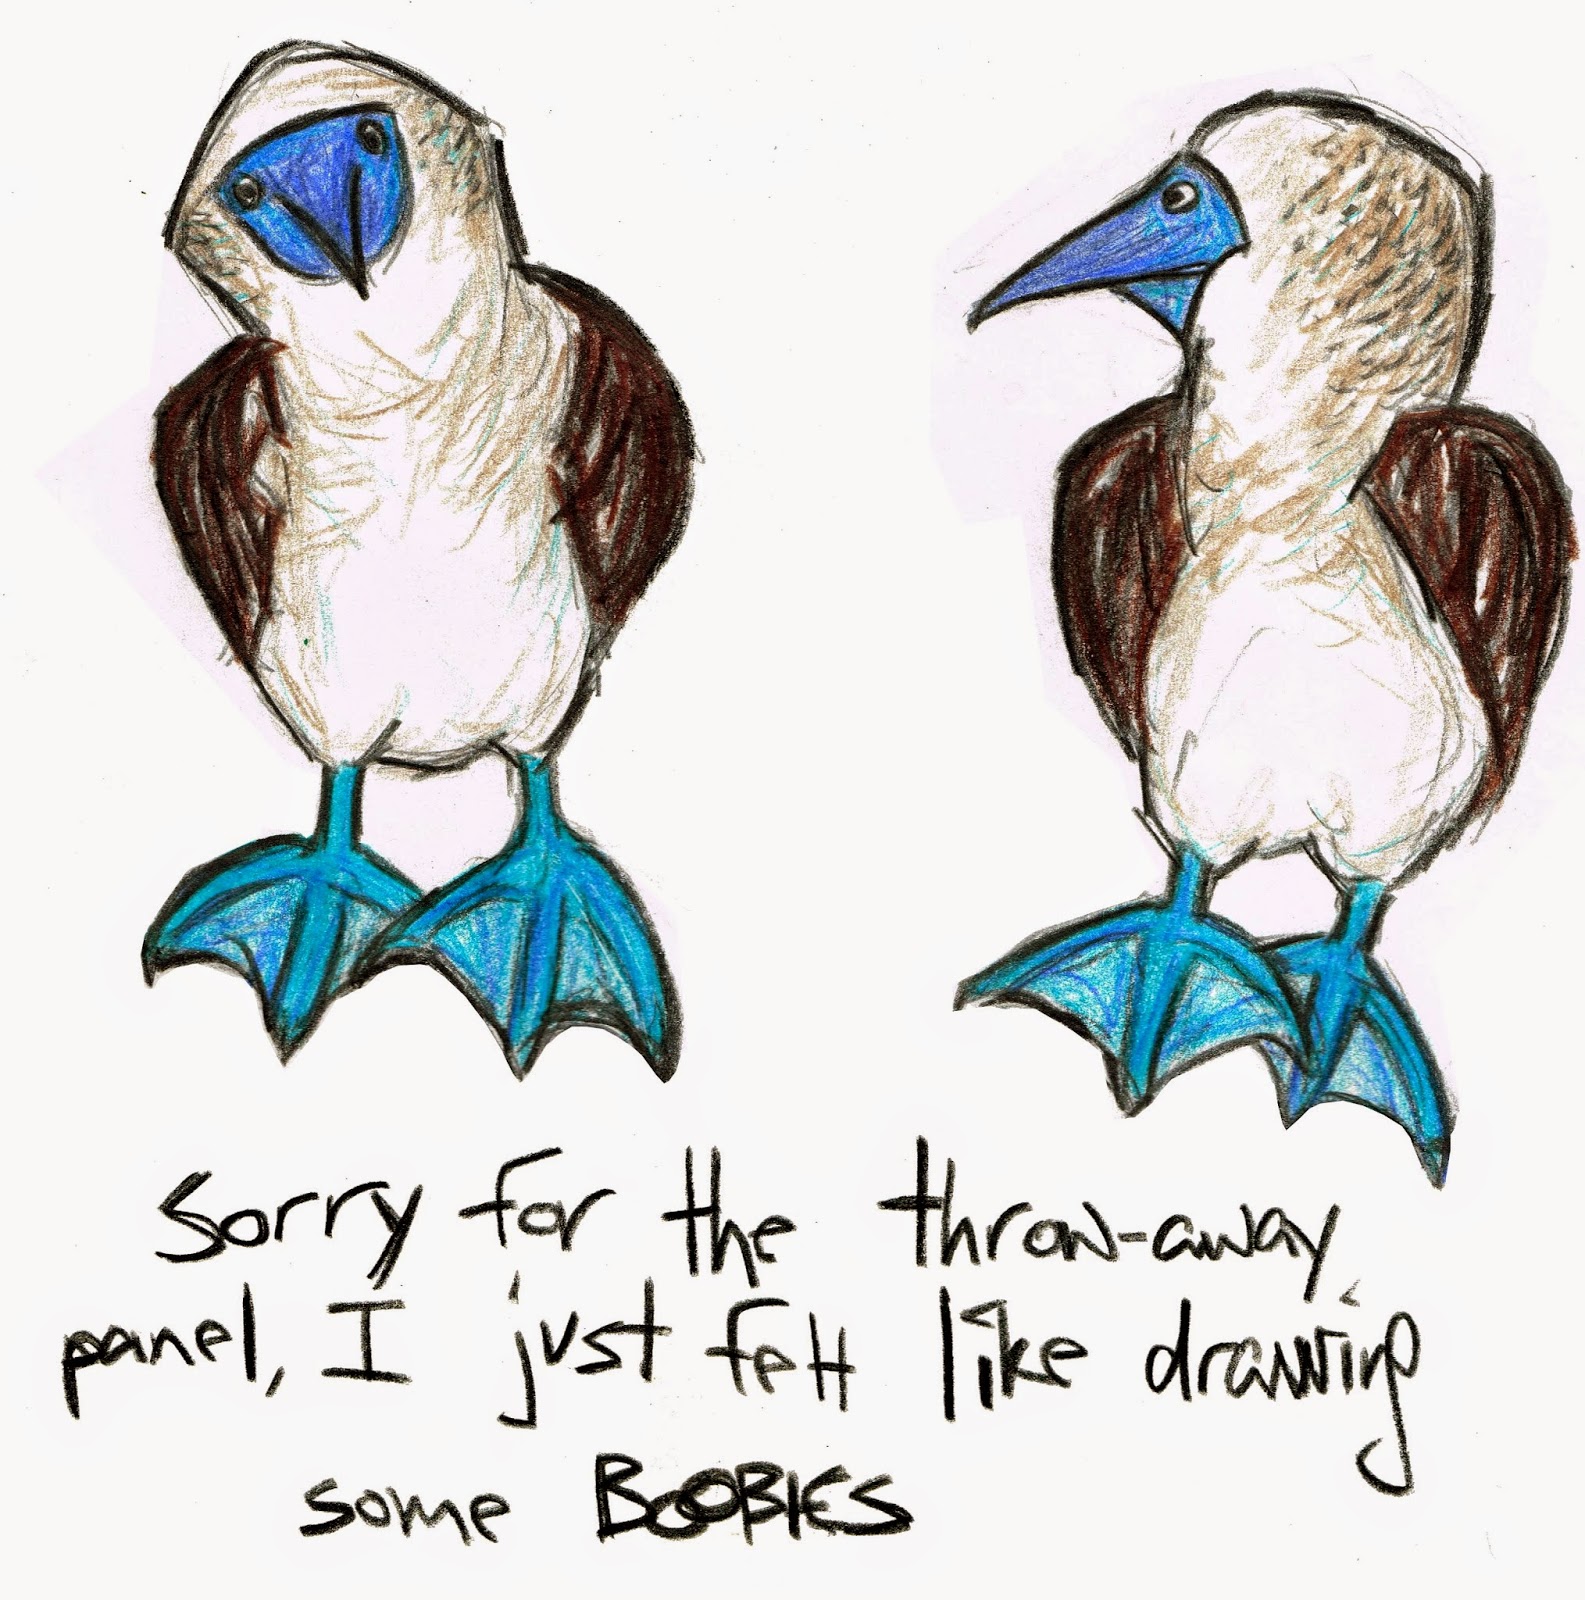 Sorry for the throw-away panel, I just felt like drawing some BOOBIES *drawing of blue-footed boobies*